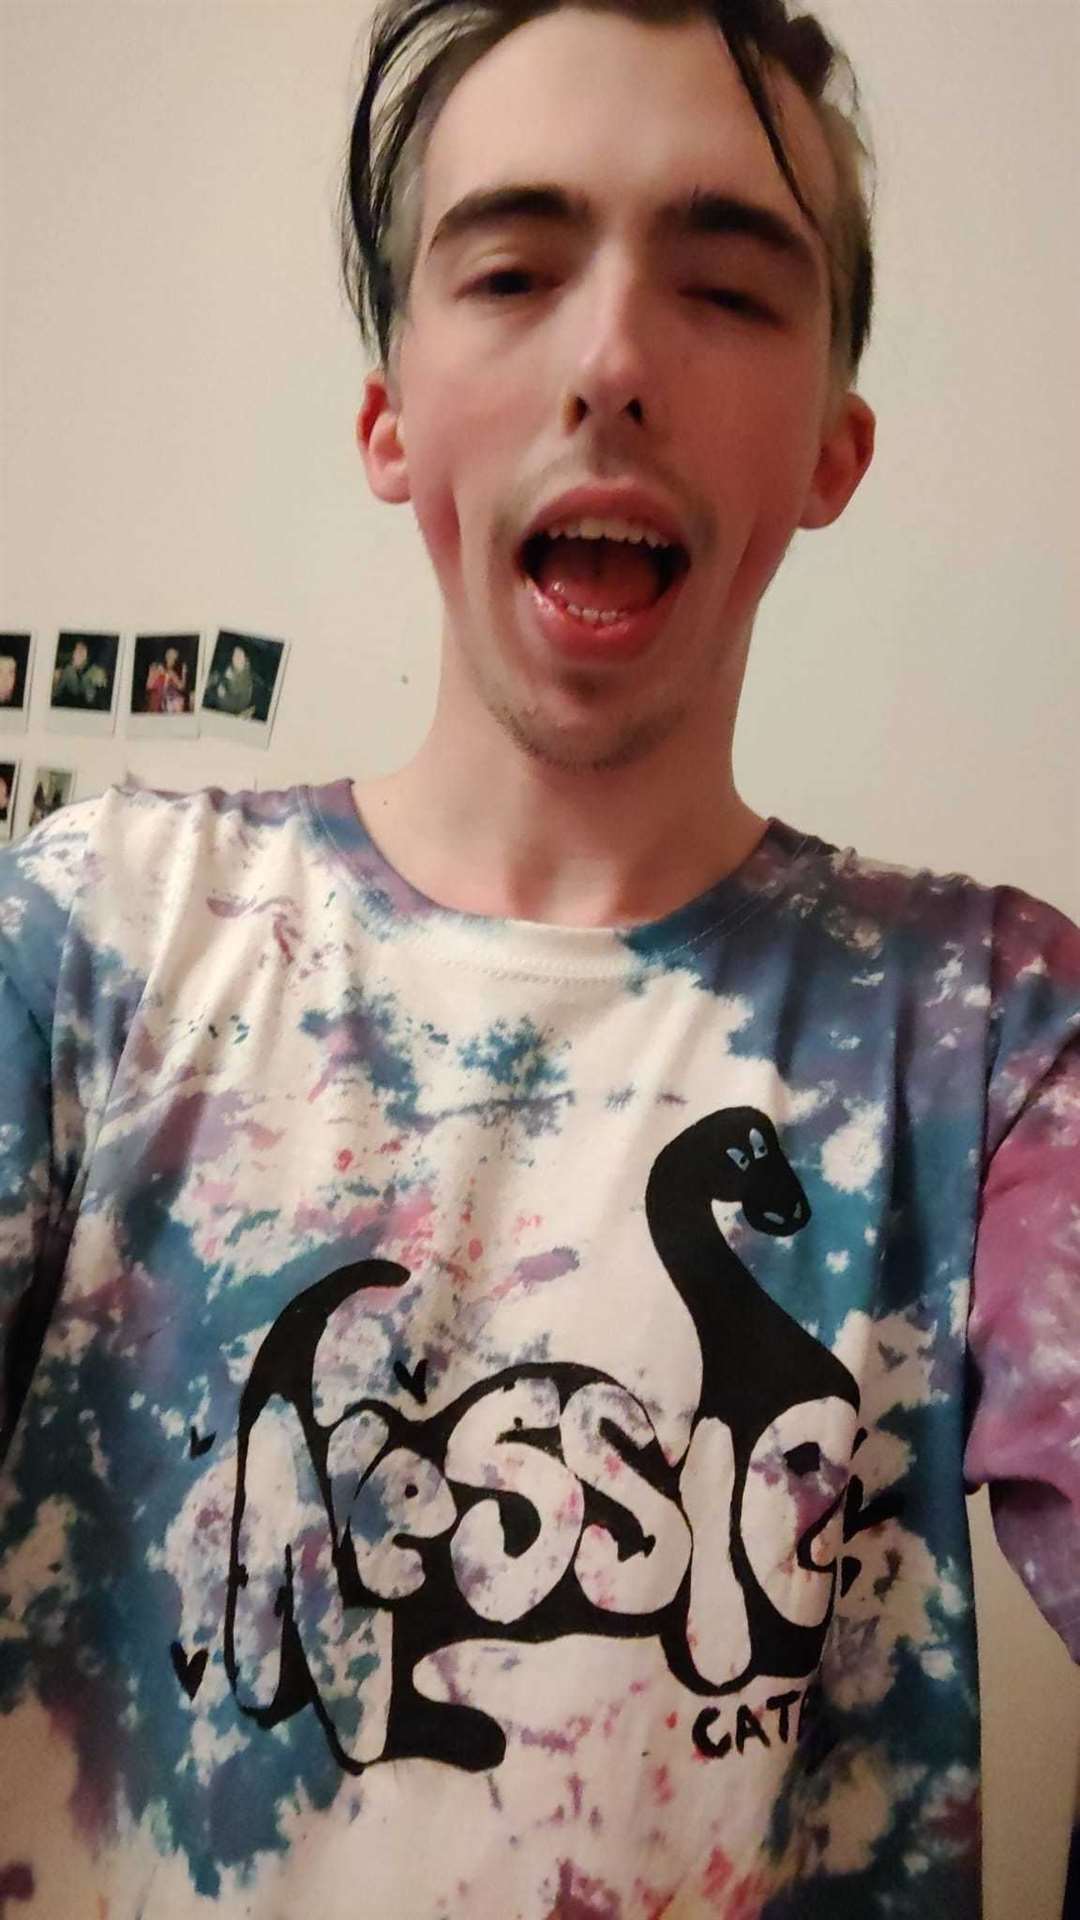 Guitarist Cam models one of the Nessie T-shirts the band has made.